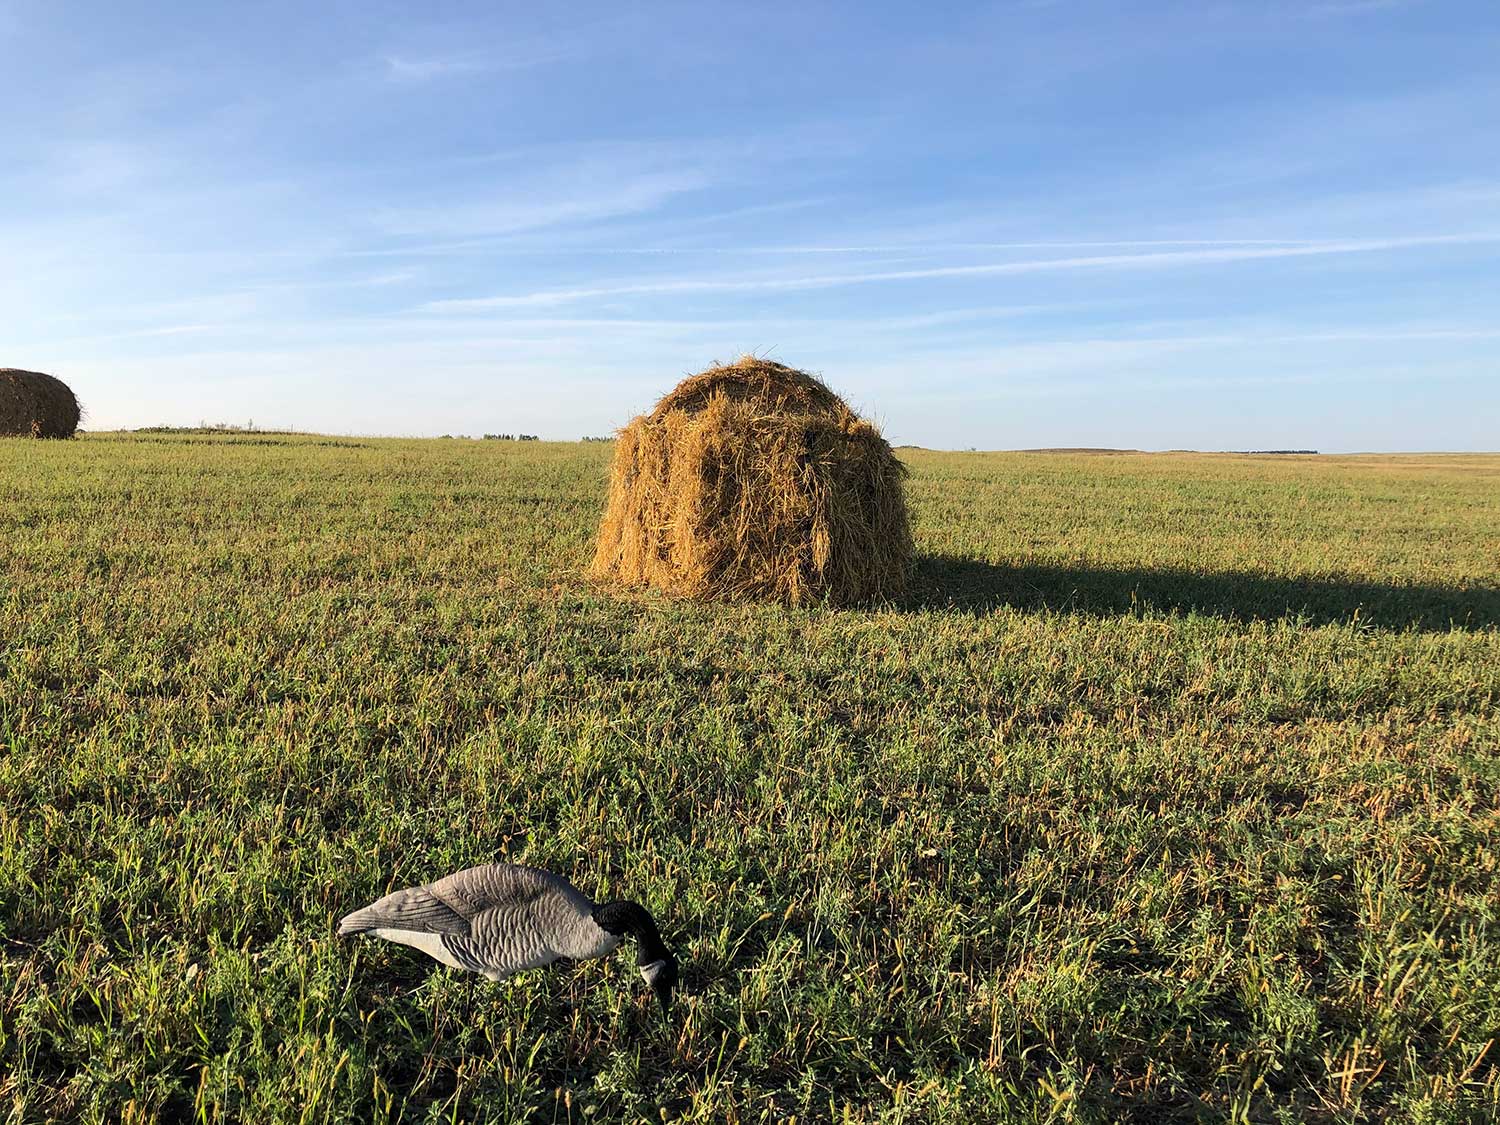 A goose decoy in an open field with a hay bale in the background.